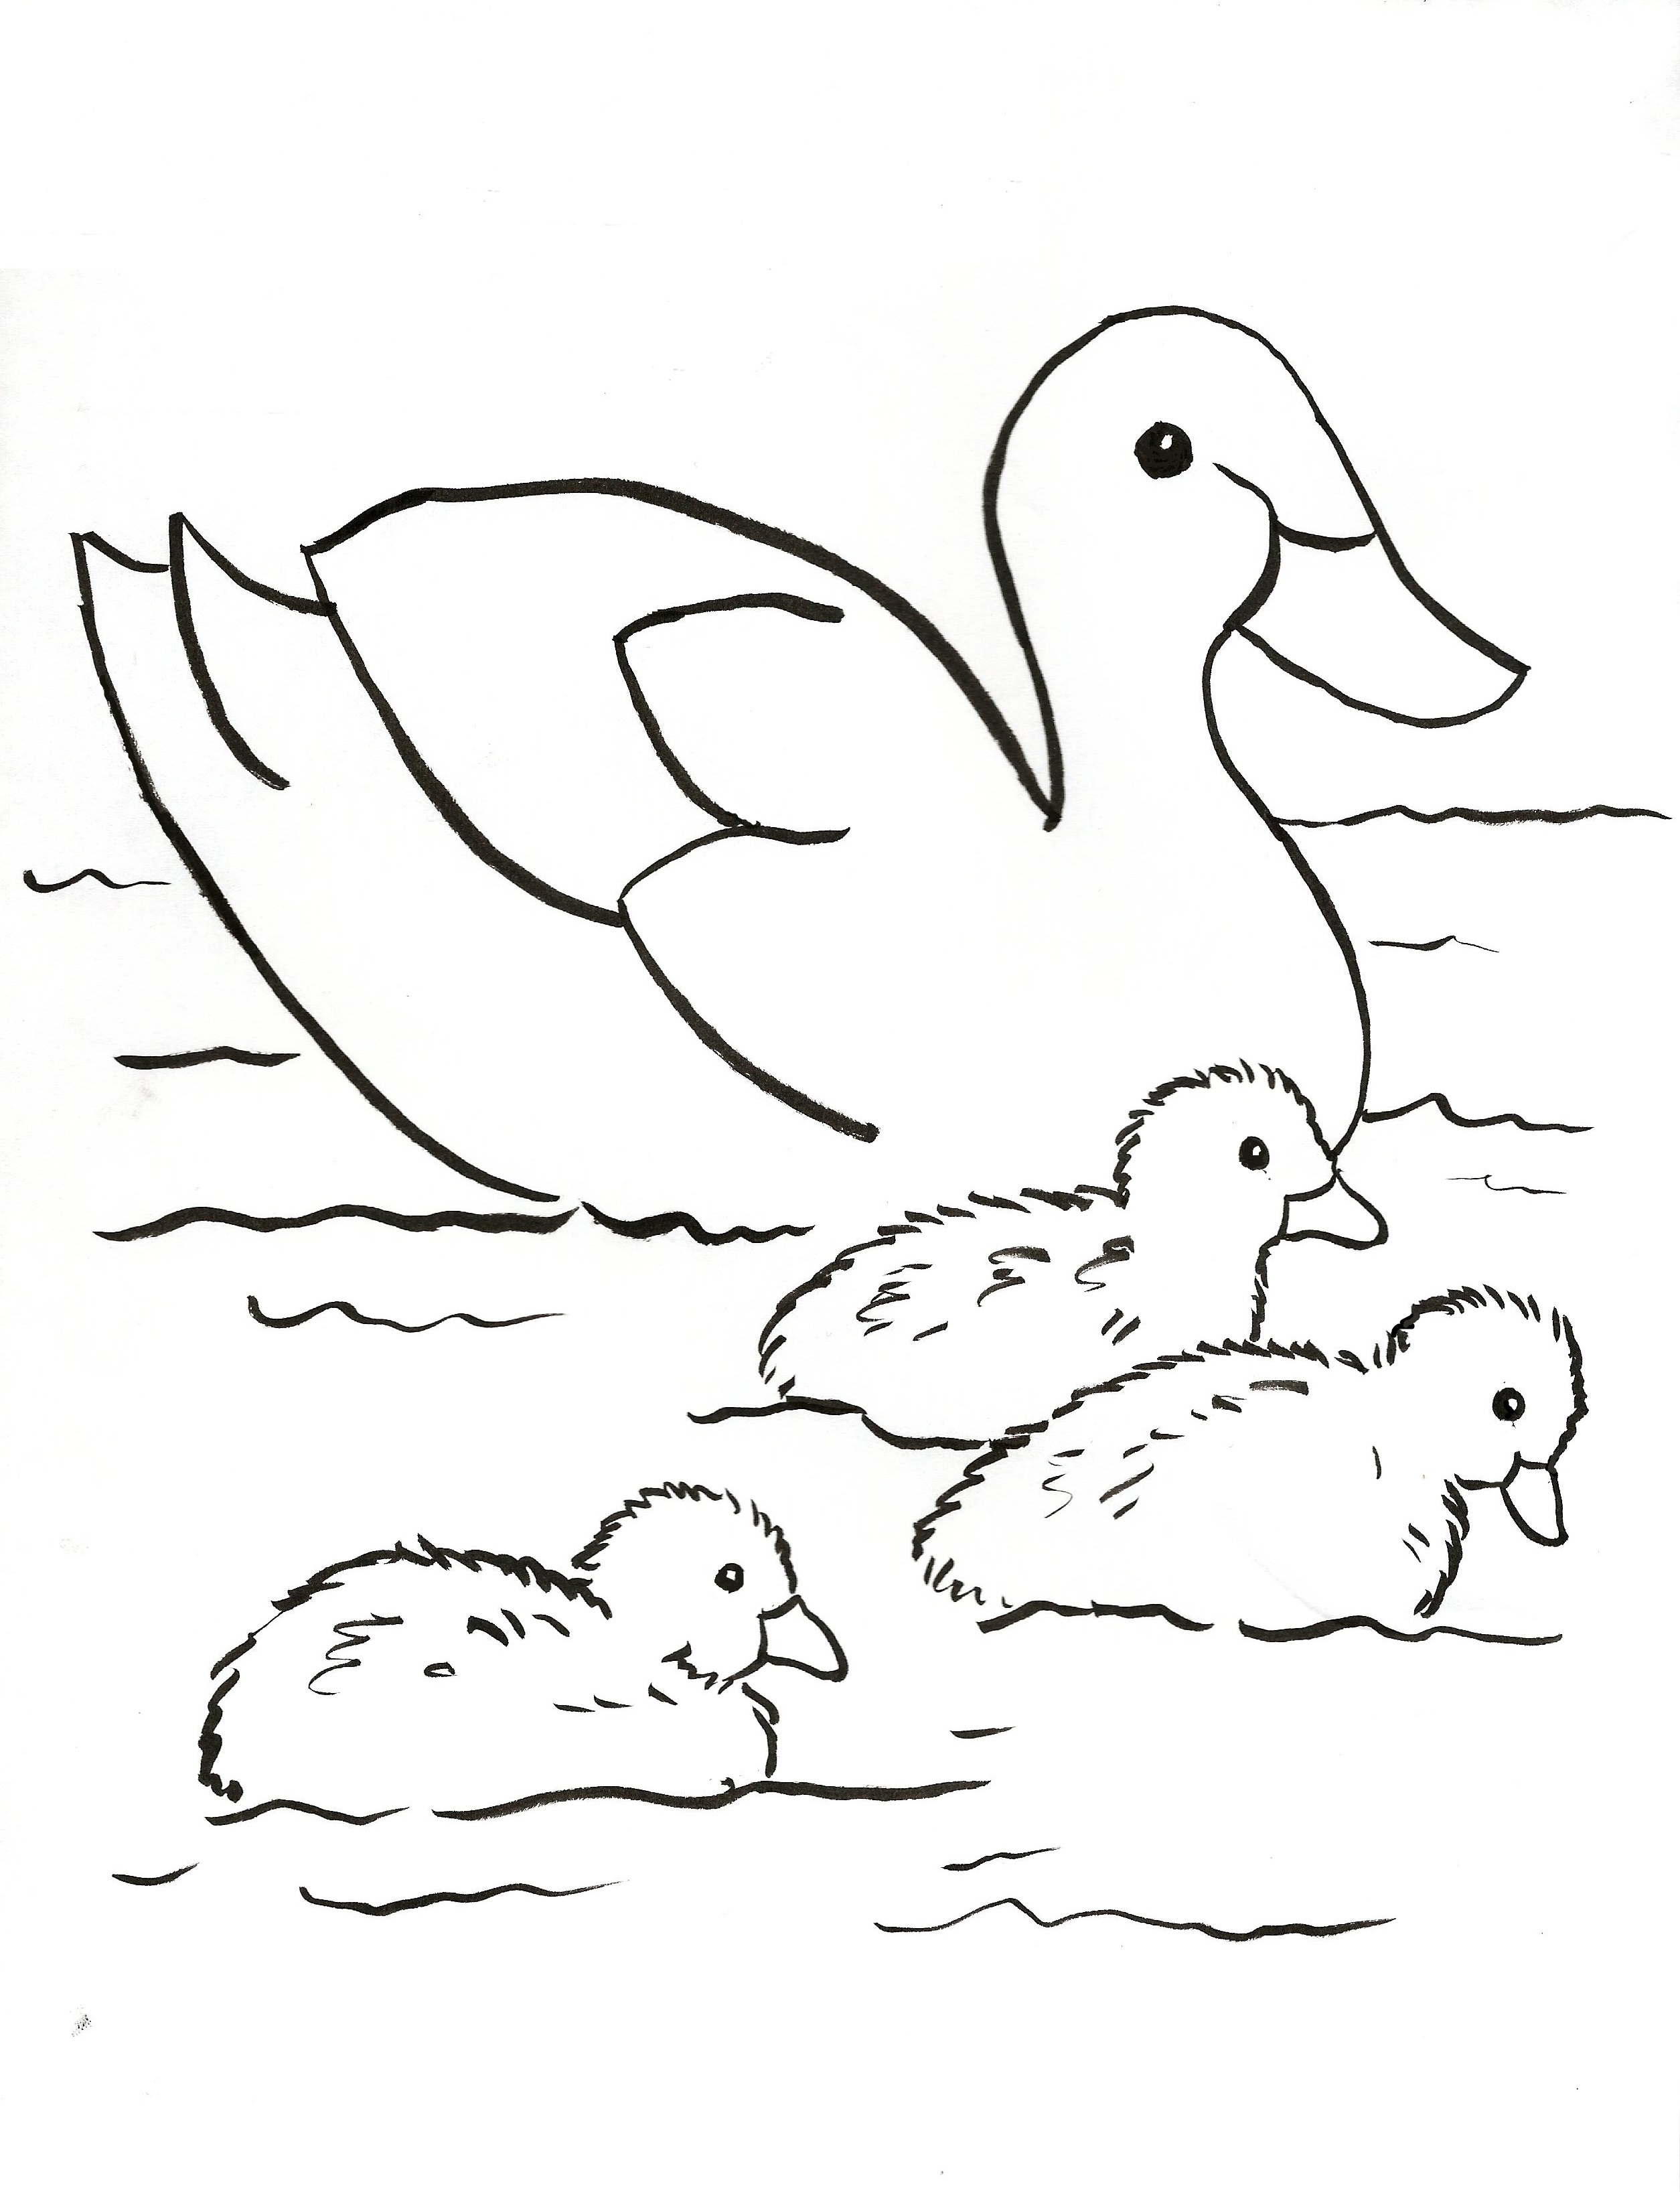 pond-animals-coloring-pages-at-getdrawings-free-download